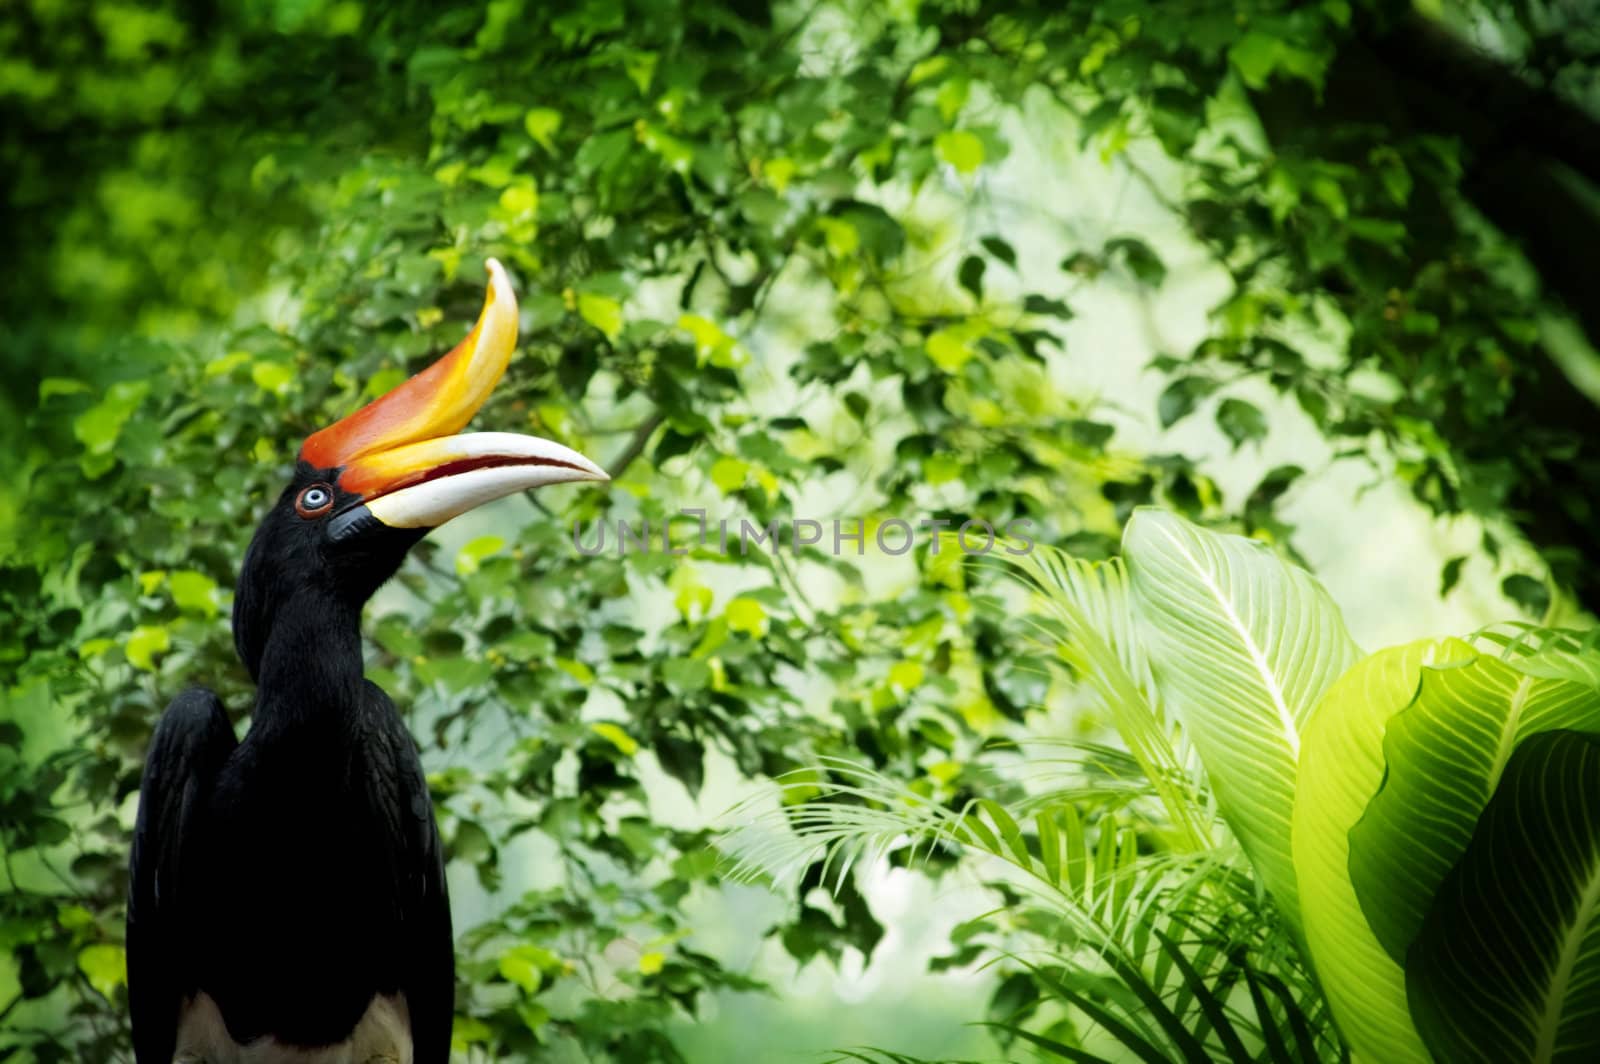 Borneo exoctic great hornbill in tropical rainforest, Malaysia.